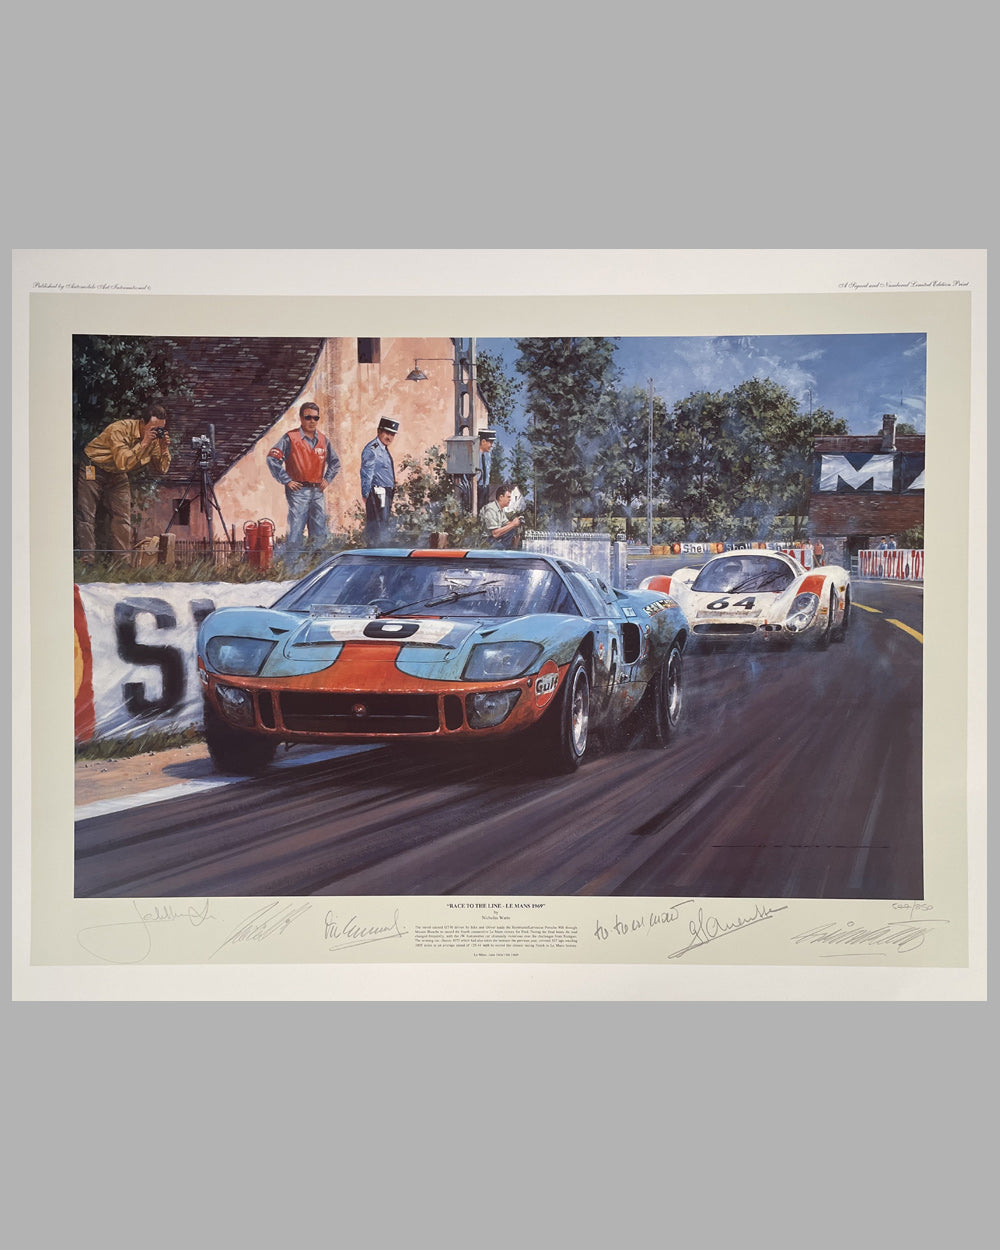 Race to the Line - Le Mans 1969 print by Nicholas Watts, autographed by Ickx, Oliver, Elford, Herrmann, and Larousse